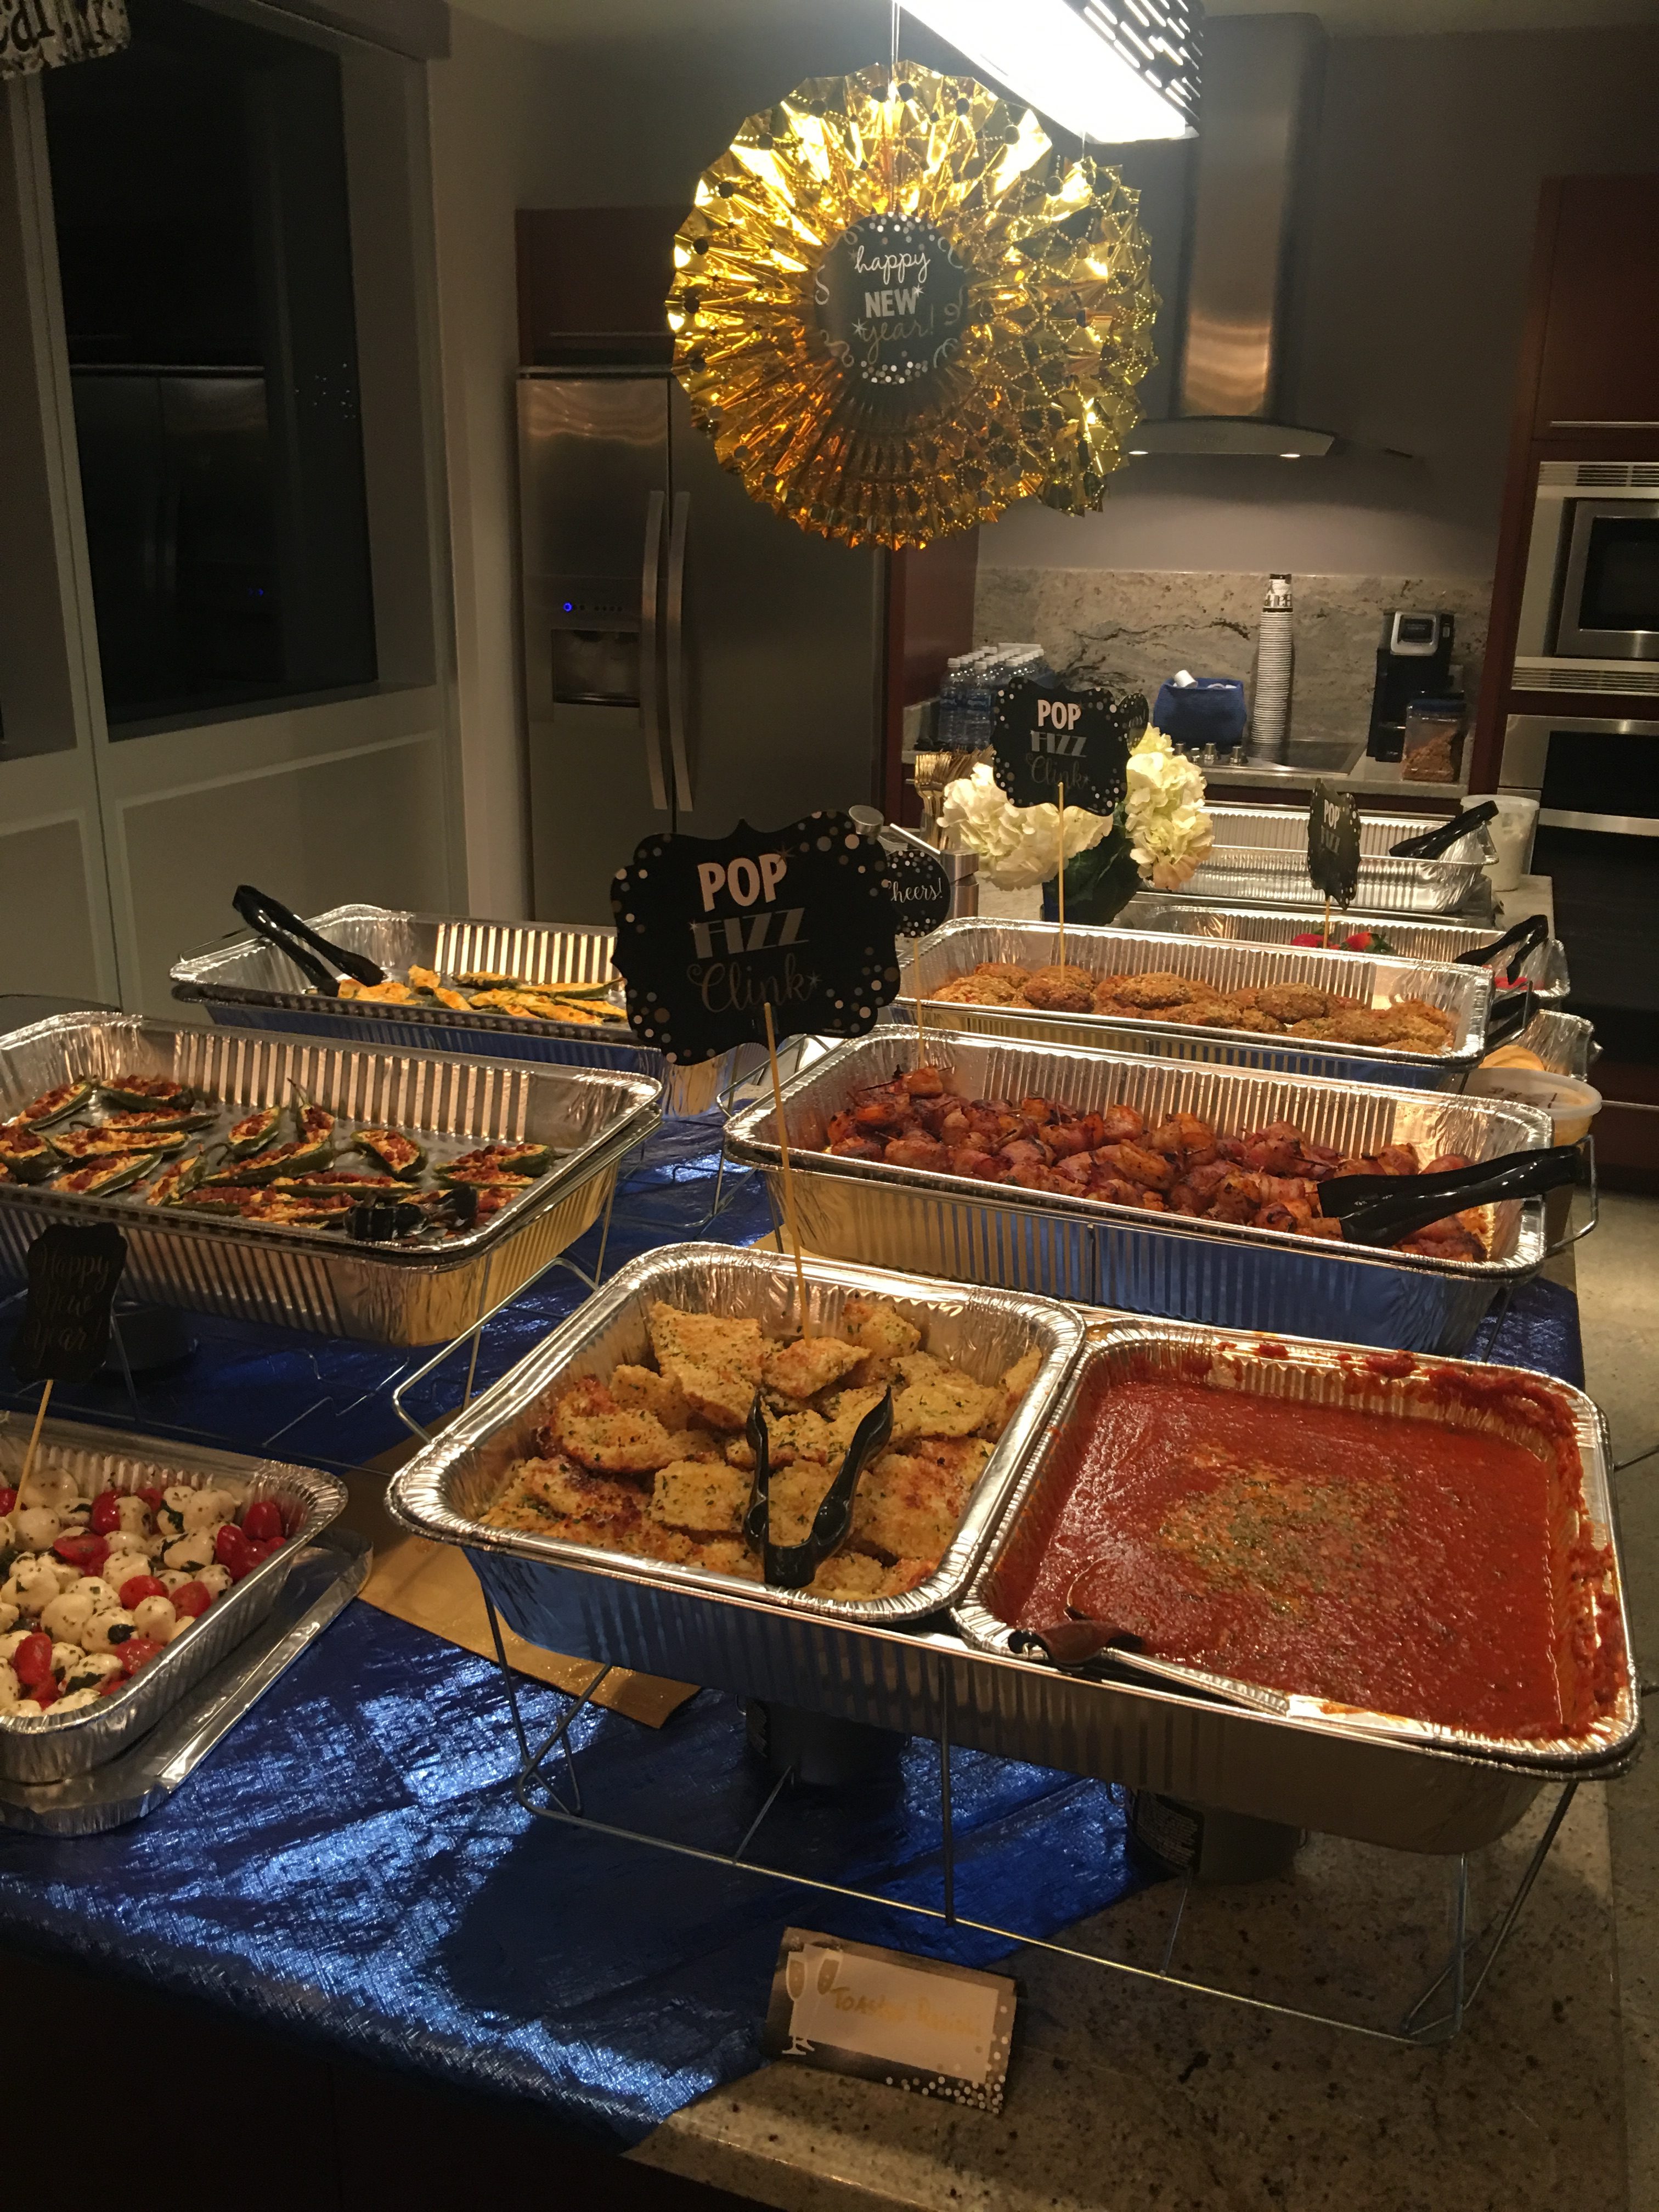 New Years Eve Catering - Toasted Raviolli & Caprese Salad by Kiss The Cook Catering of Las Vegas.